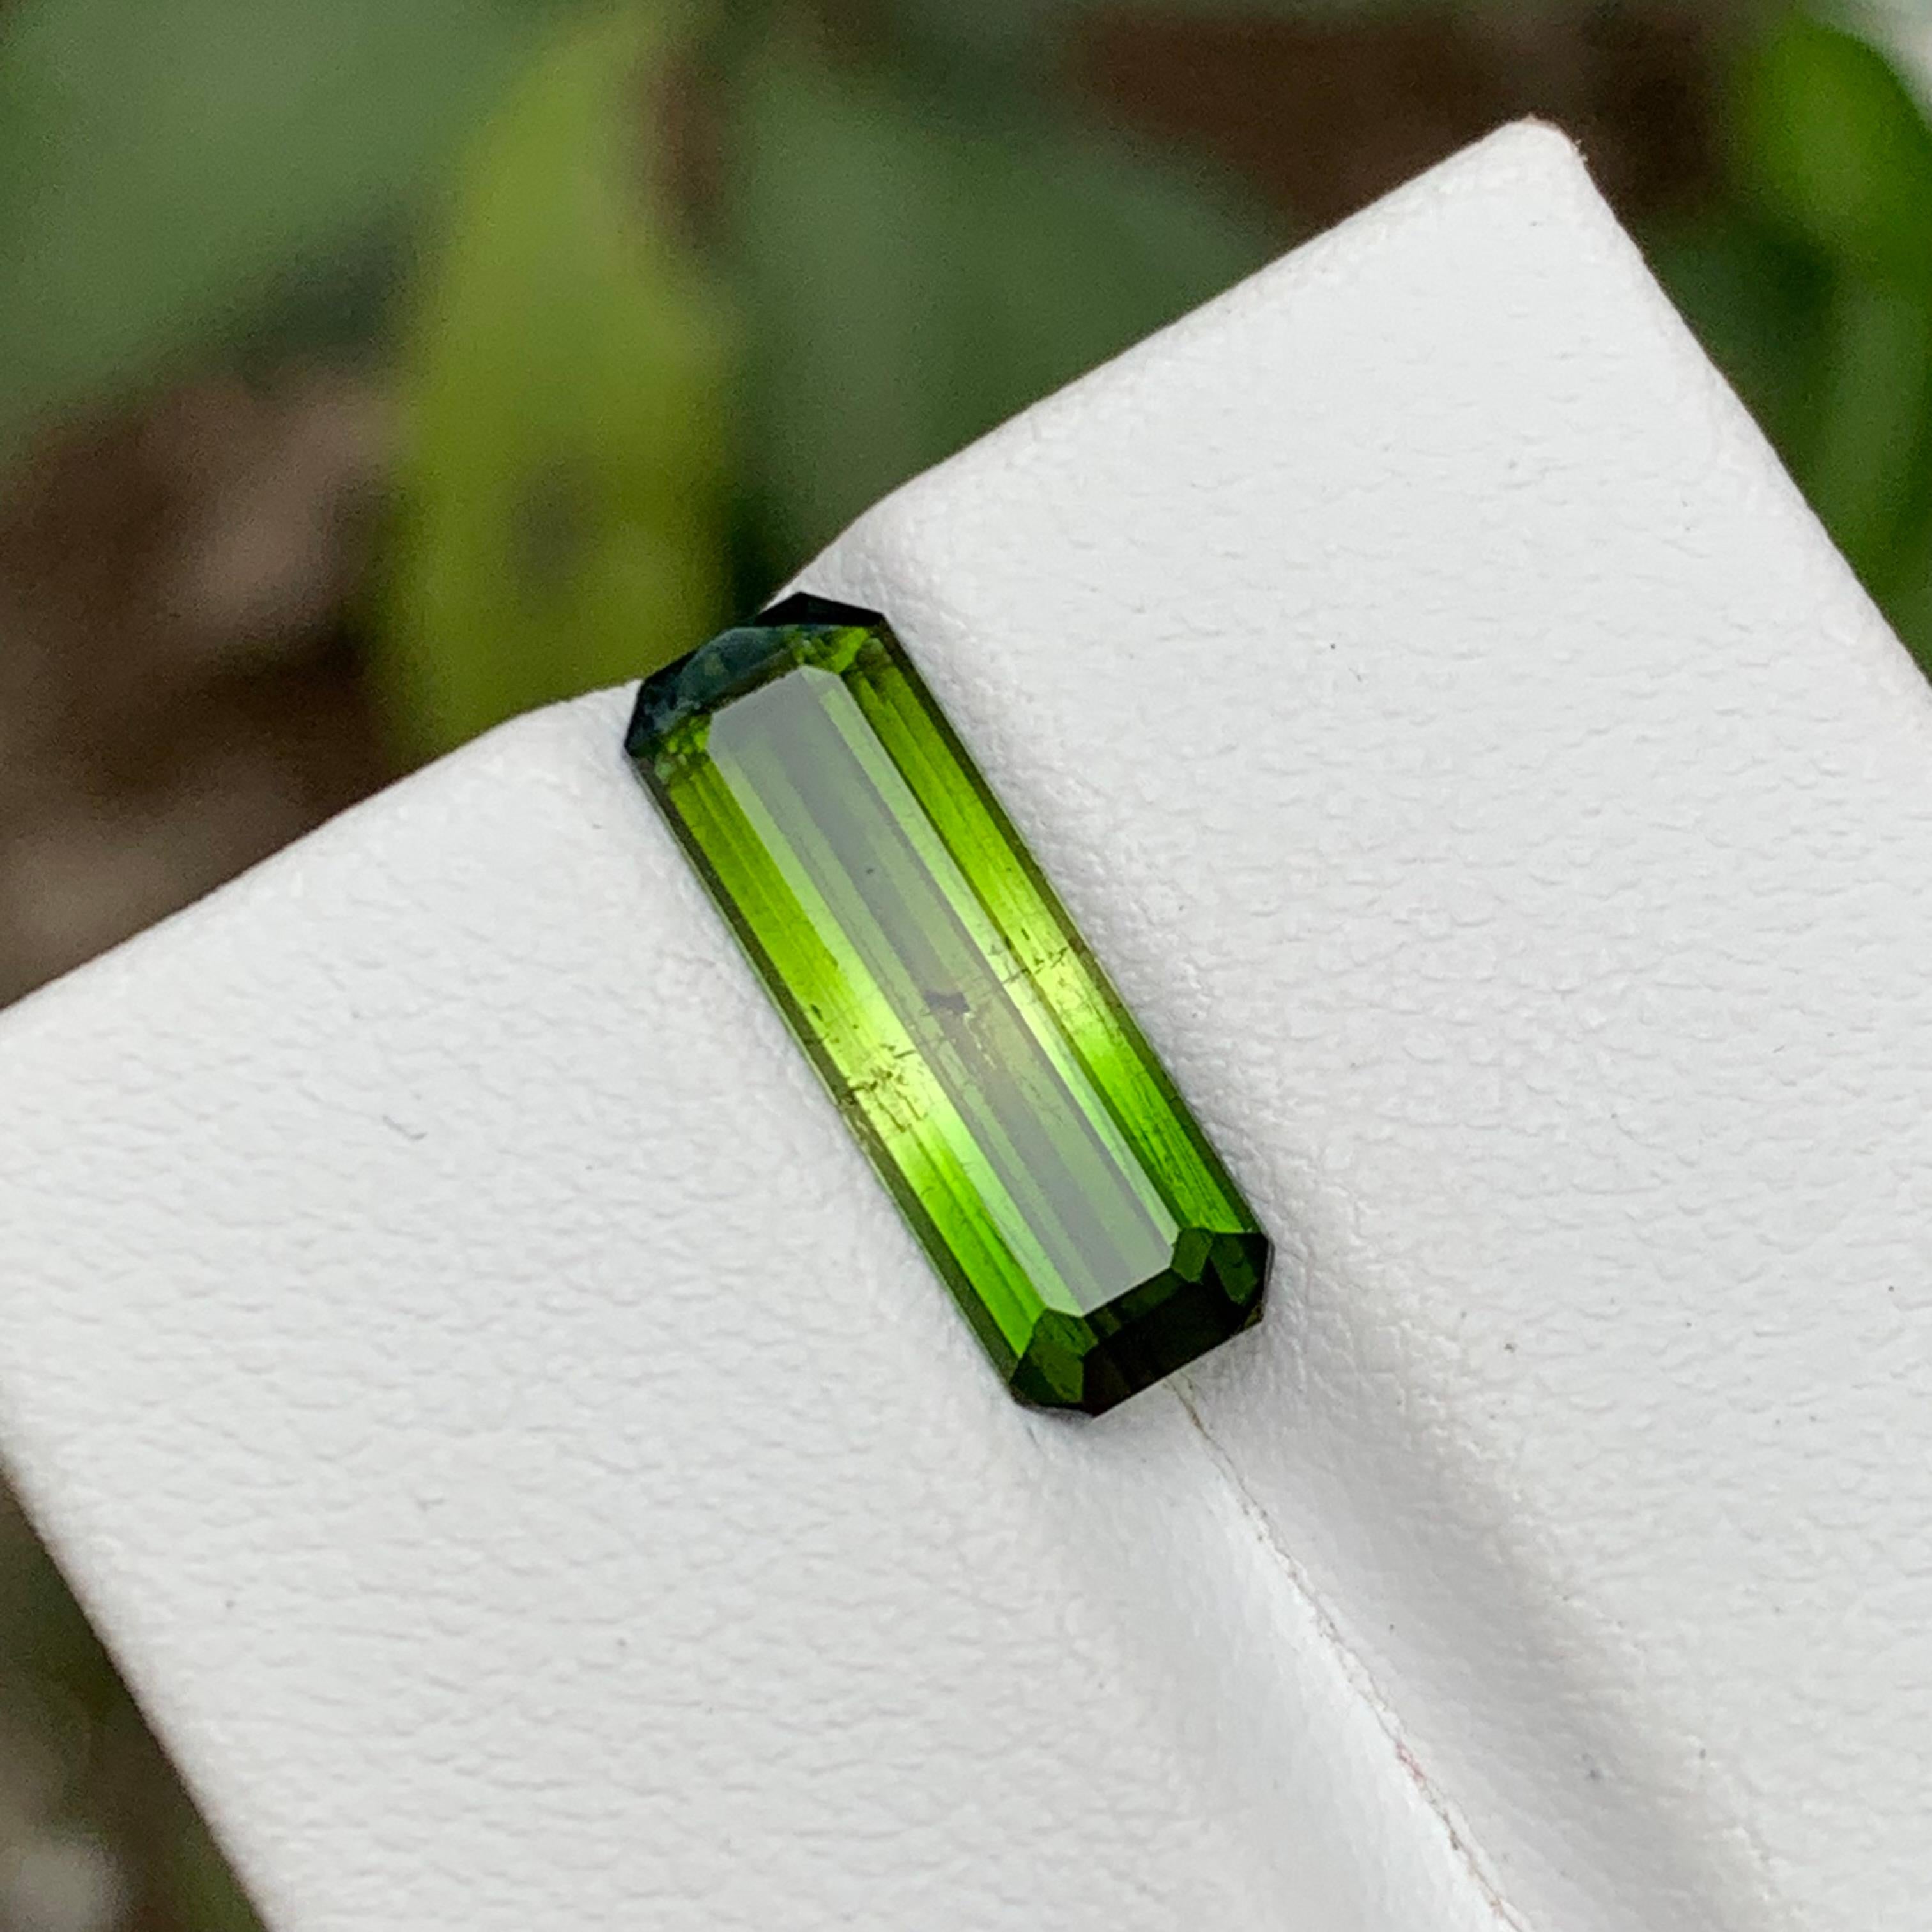 Truly exquisite 3.15 Carat Bicolor Natural Tourmaline Loose Gemstone, sourced directly from the mines of Kunar, Afghanistan. Crafted in a mesmerizing emerald cut design, this gemstone boasts a striking combination of vivid green and yellow hues,